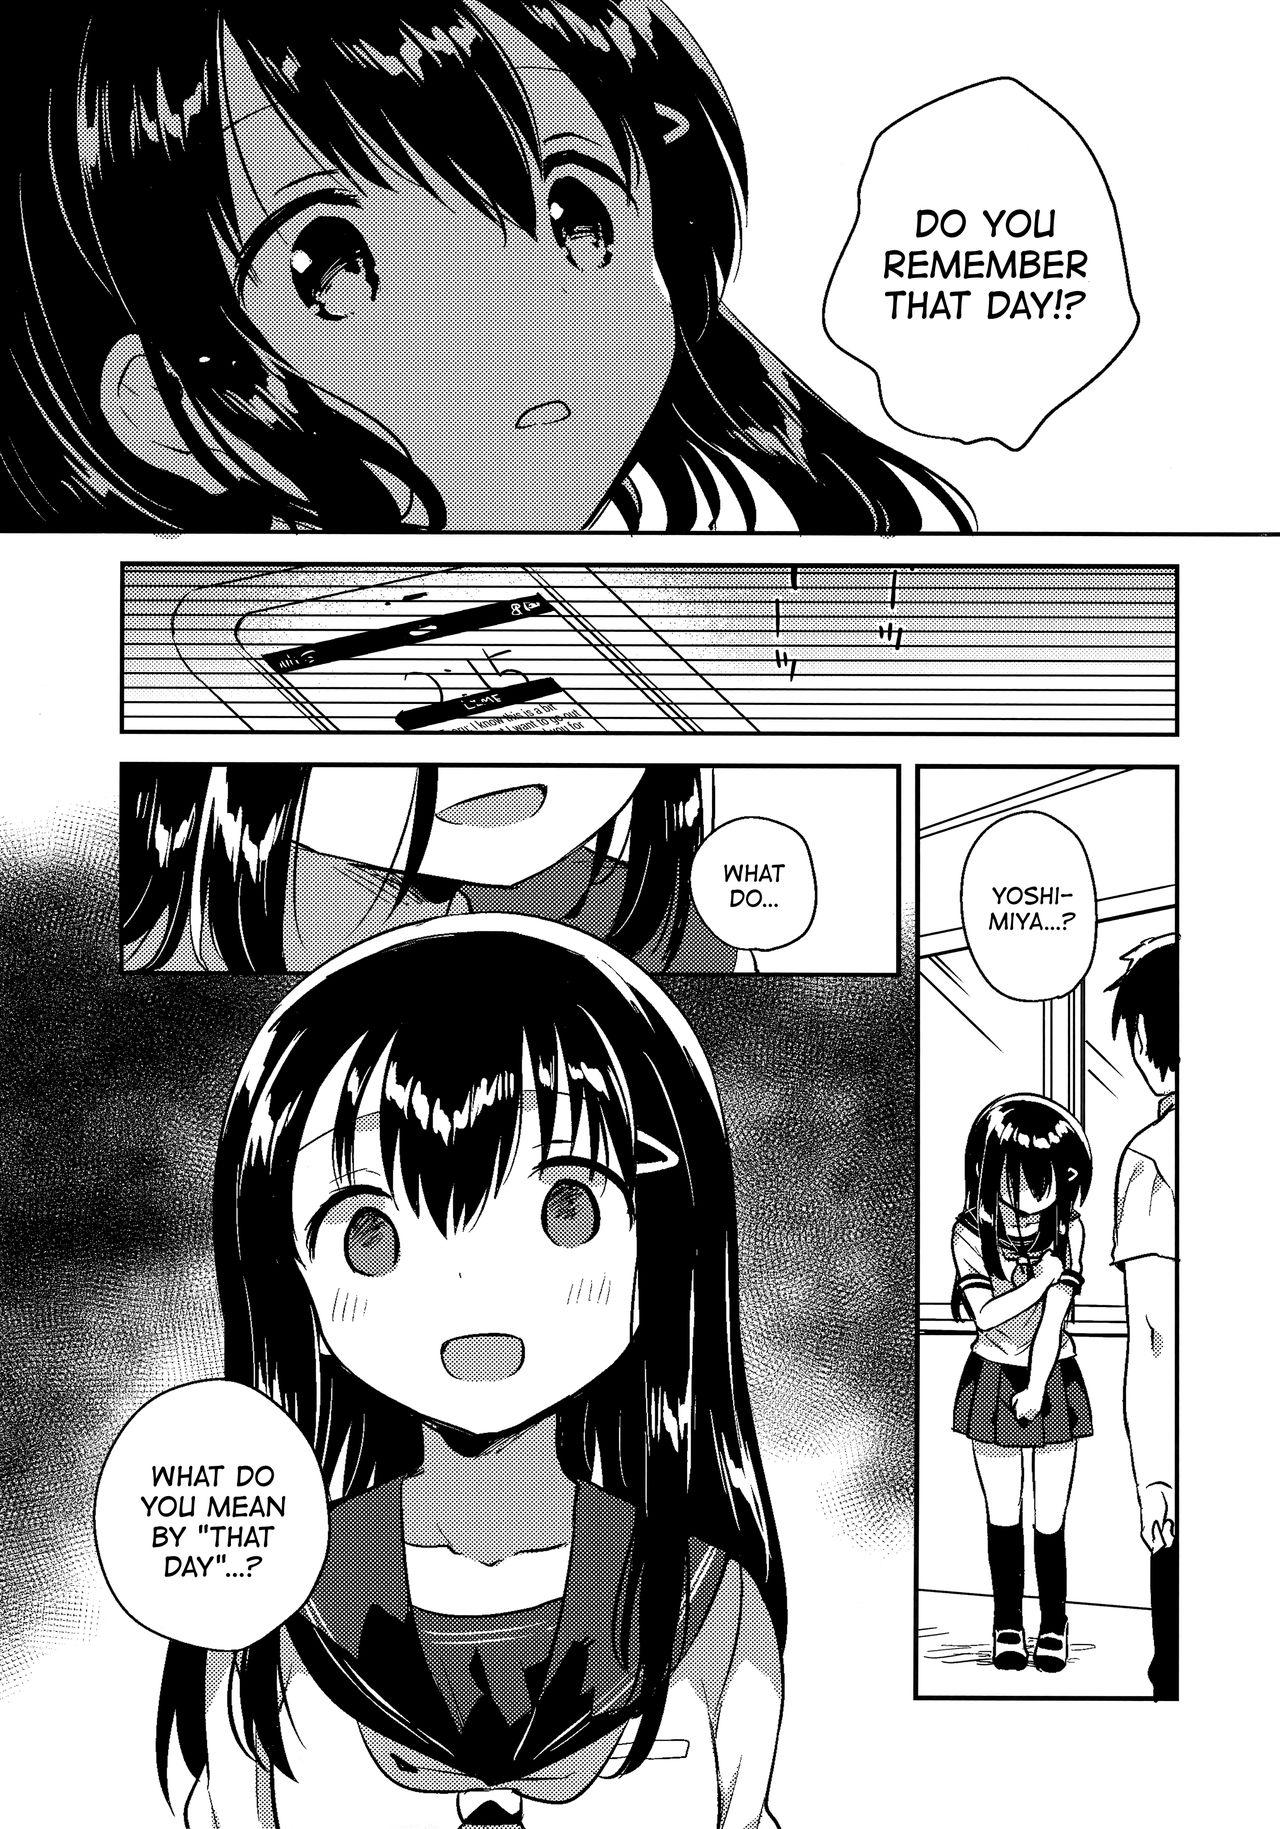 Squirting Imouto wa Amnesia close | My Little Sister Has Amnesia - close Ass - Page 3